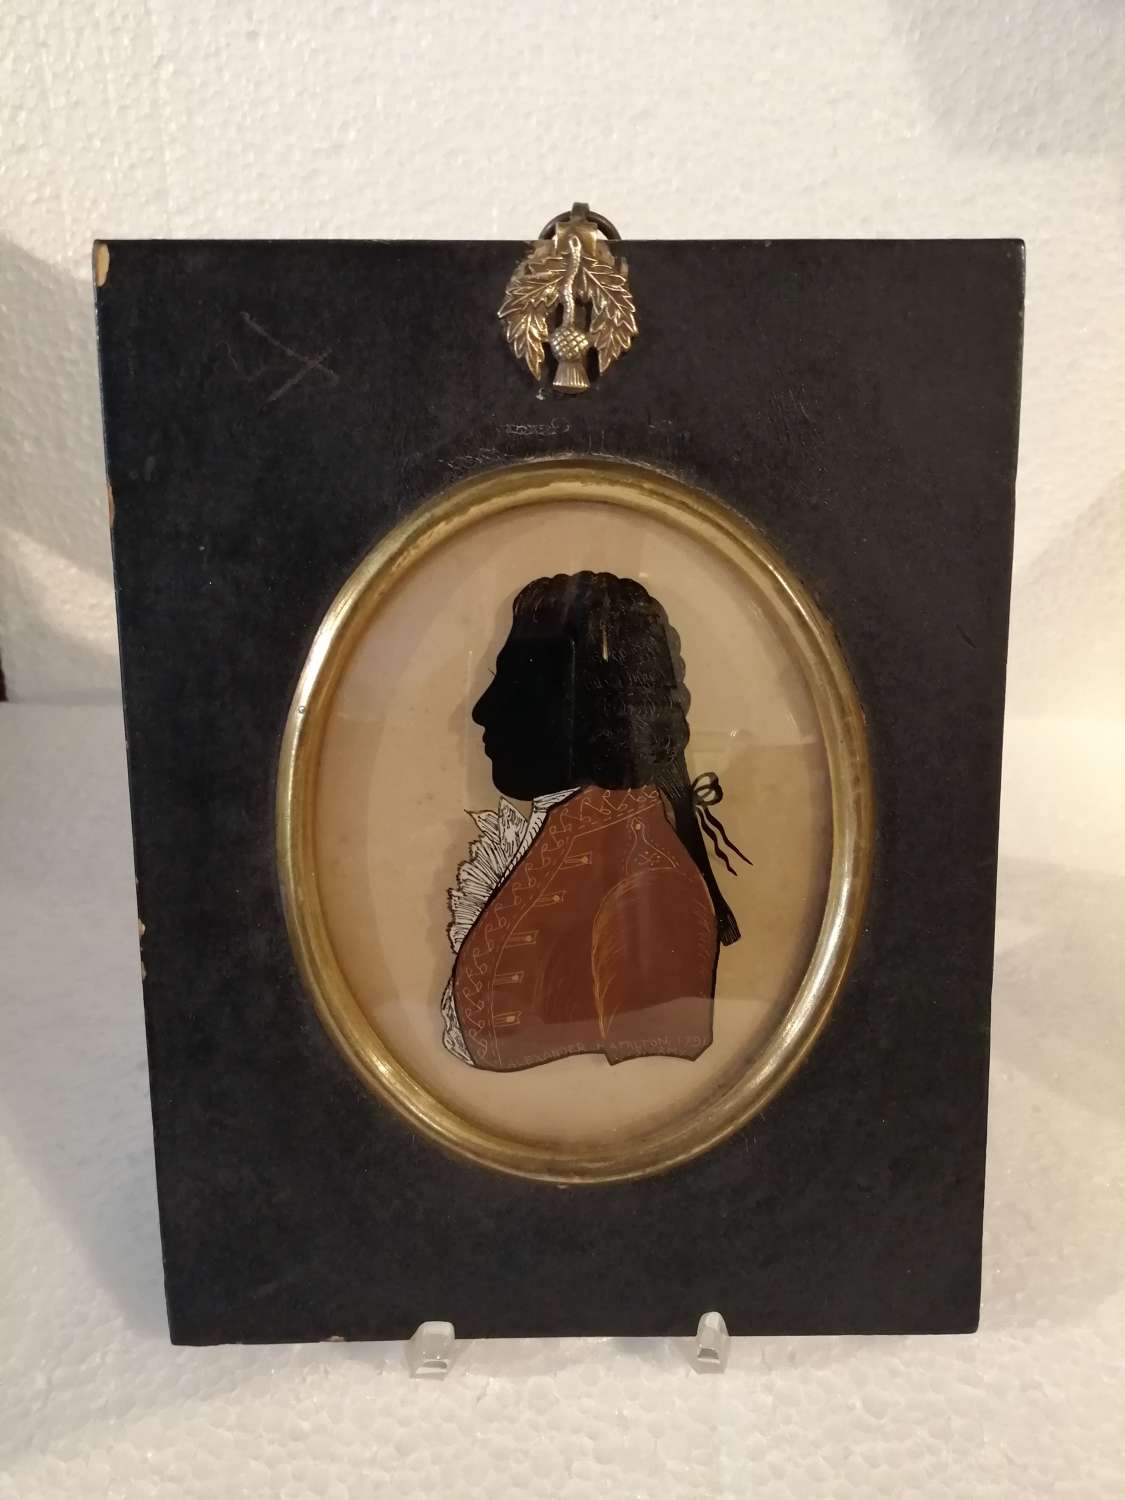 19th century reverse painting on glass of military interest